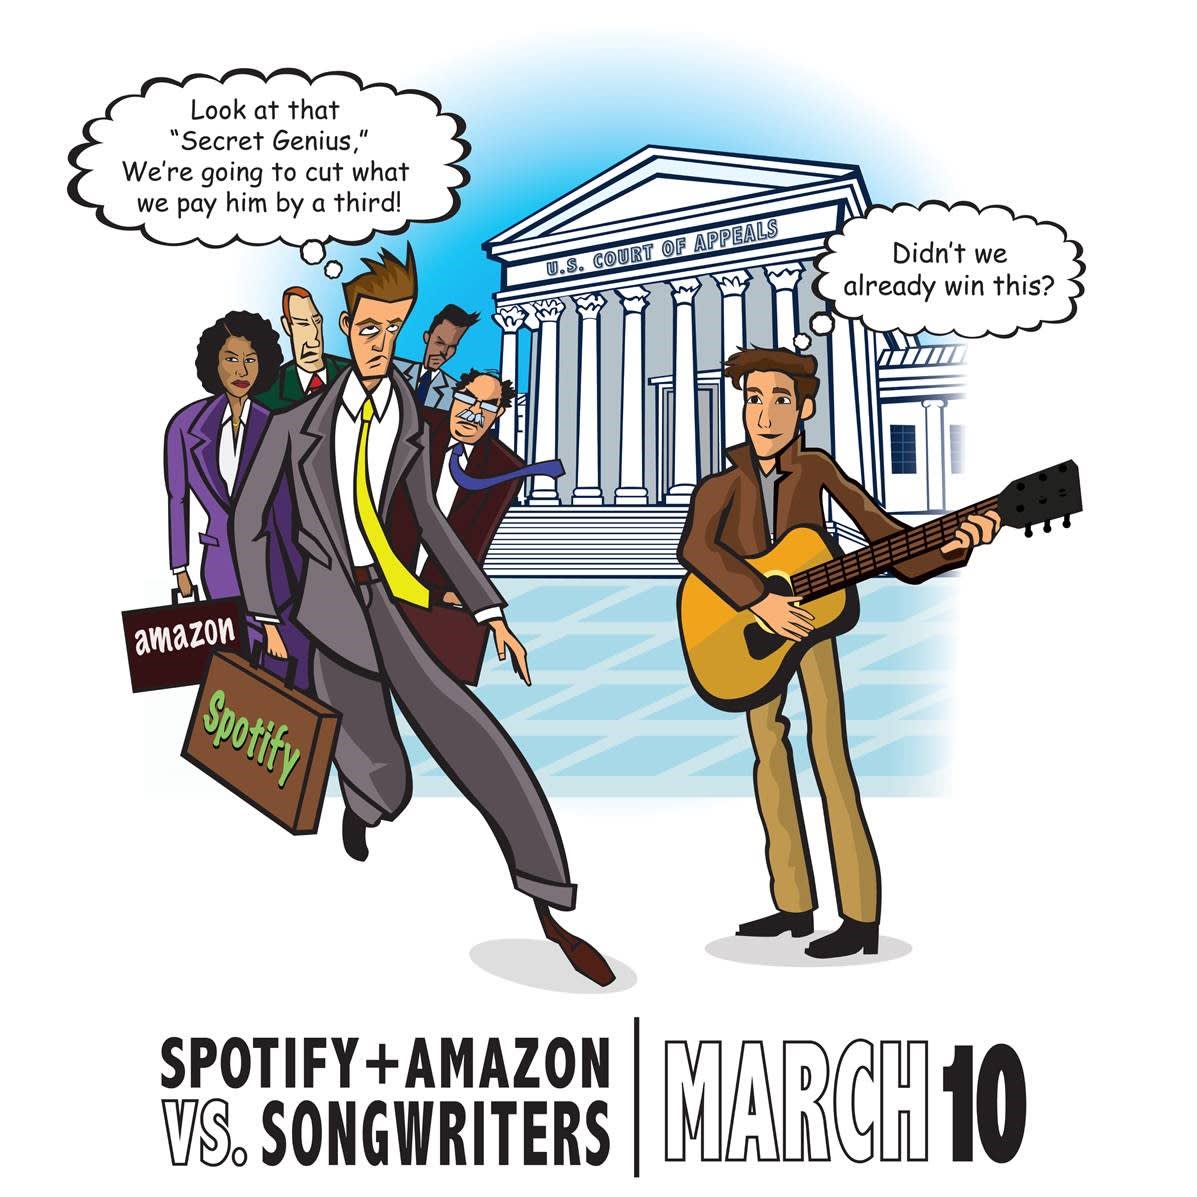 Attention&#160;Songwriters:&#160;Spotify&#160;&&#160;Amazon going to court to appeal CRB decision